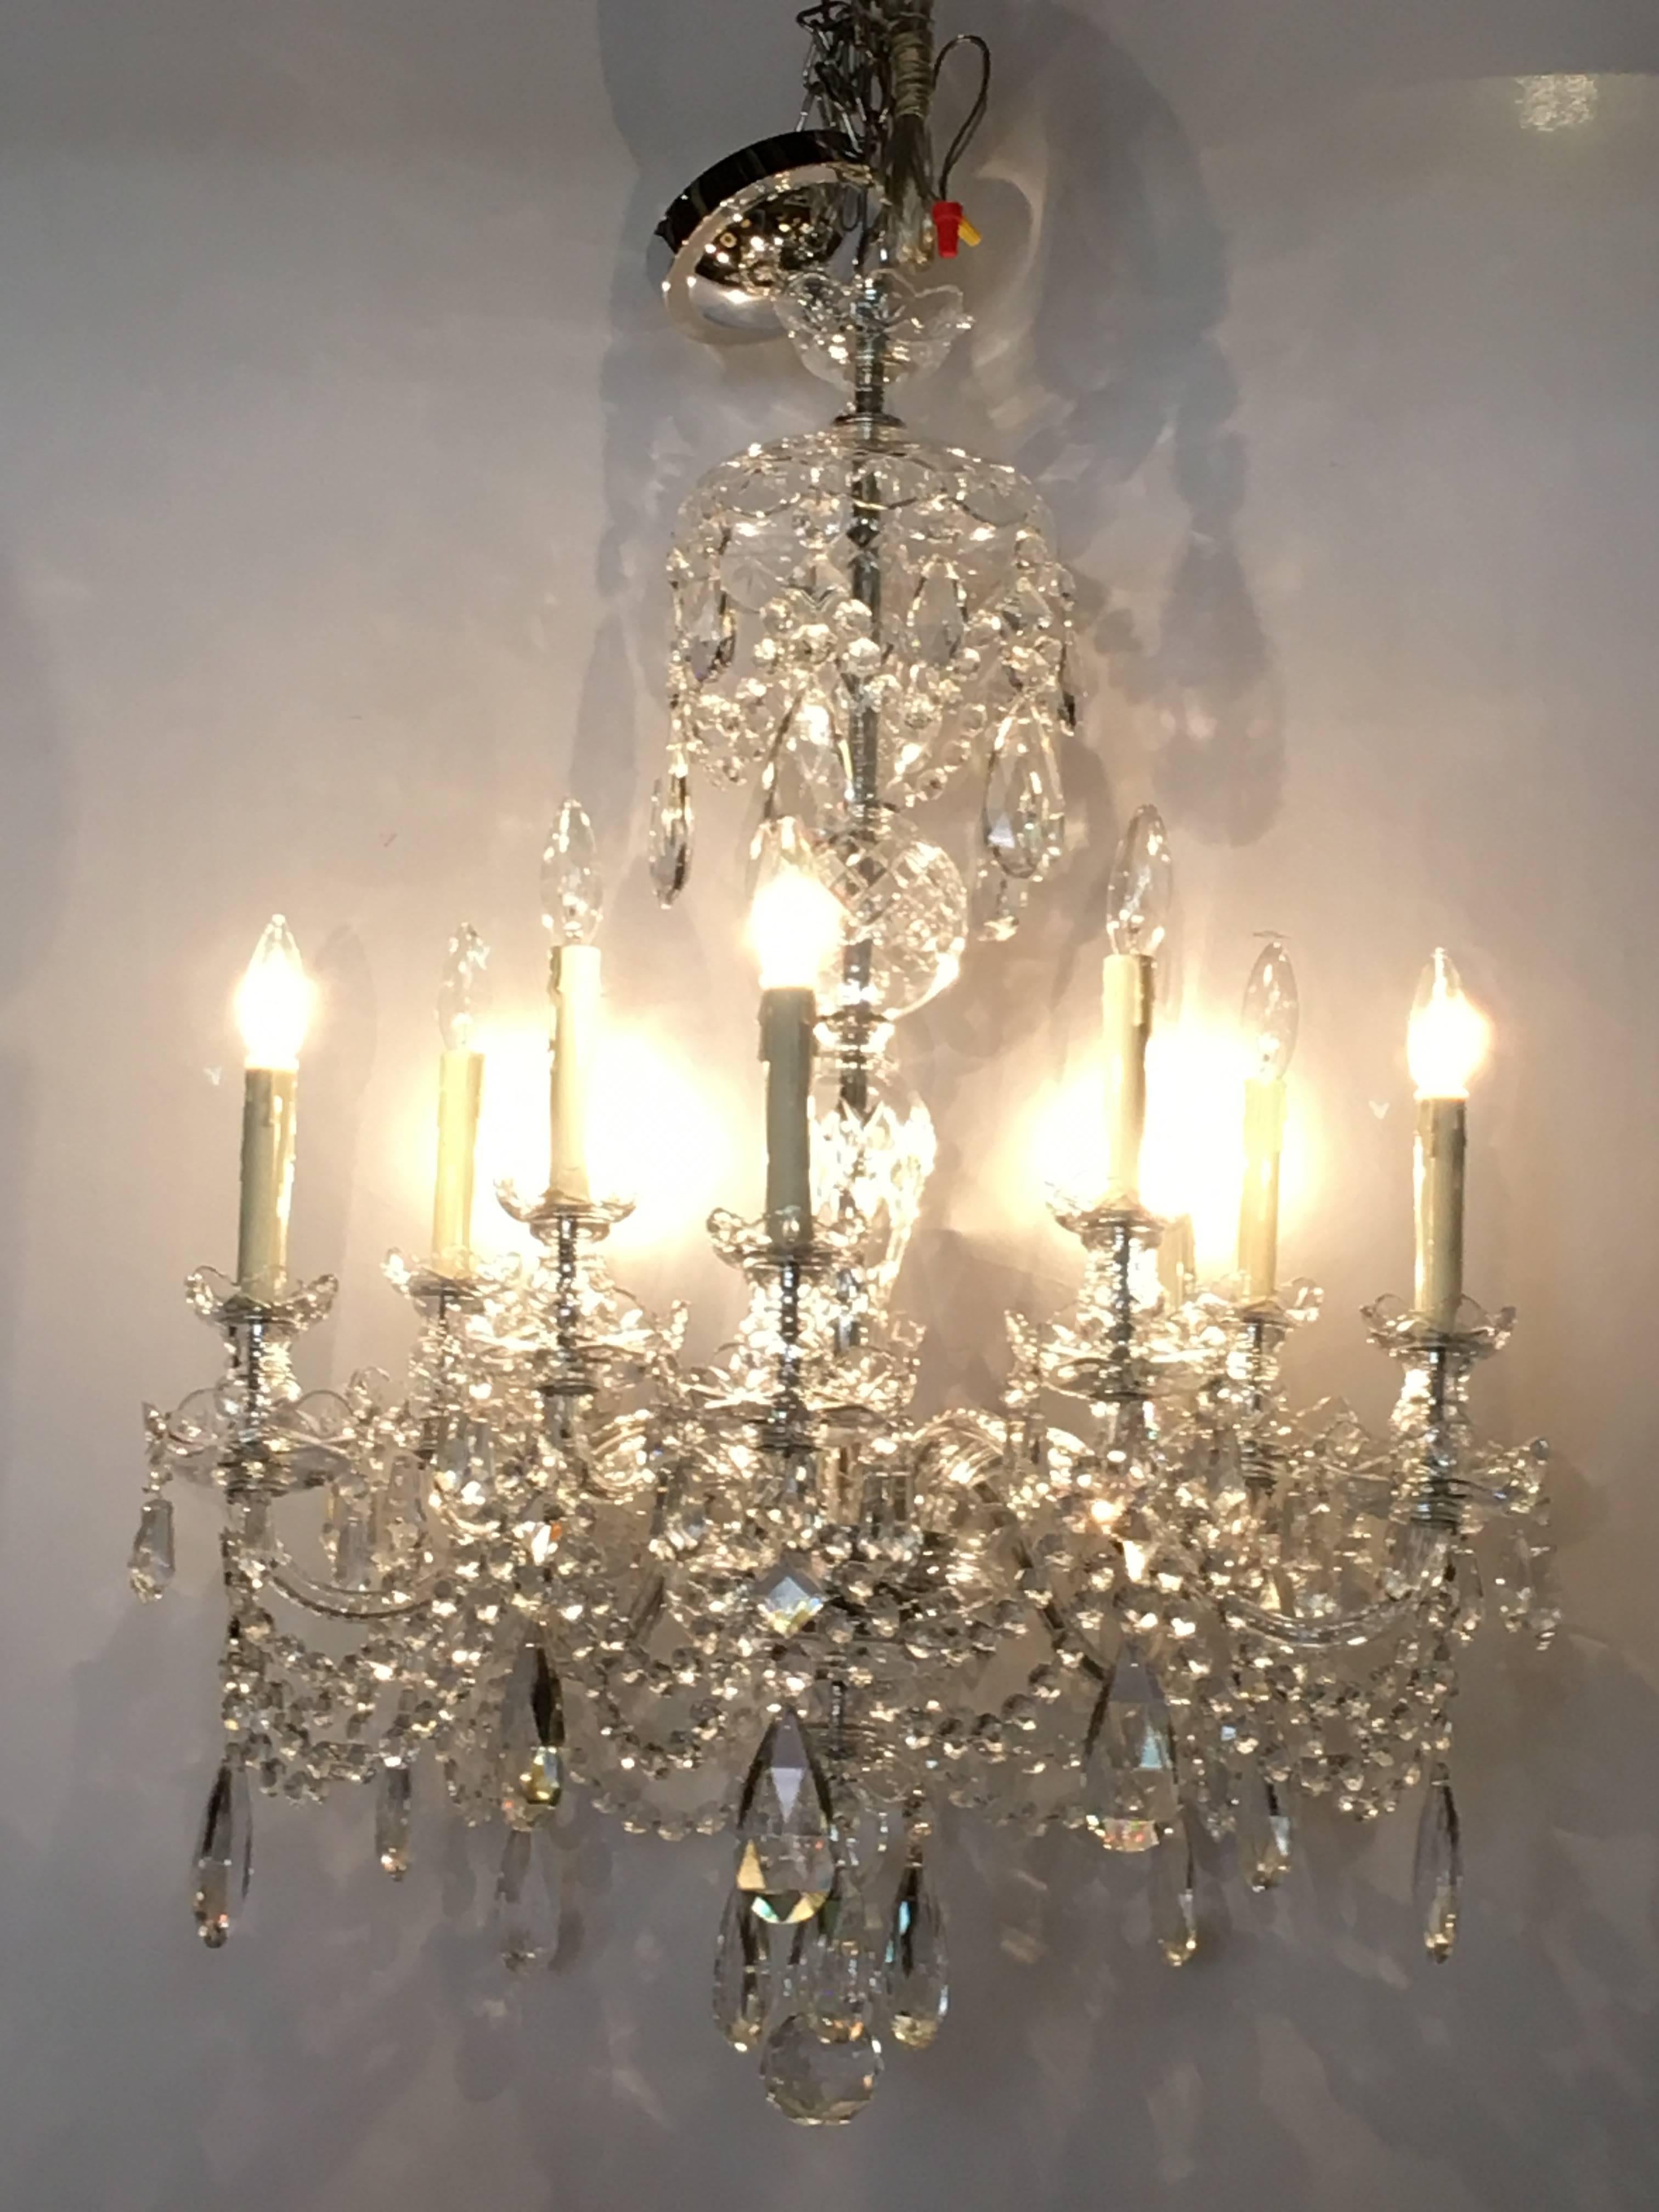 A ten-light cut crystal Georgian style chandelier. This recently re-wired and cleaned chandelier depicts the Georgian Era in its full light and grandeur. Having an enormous amount of the finest cut crystals this ten light chandelier is certain to